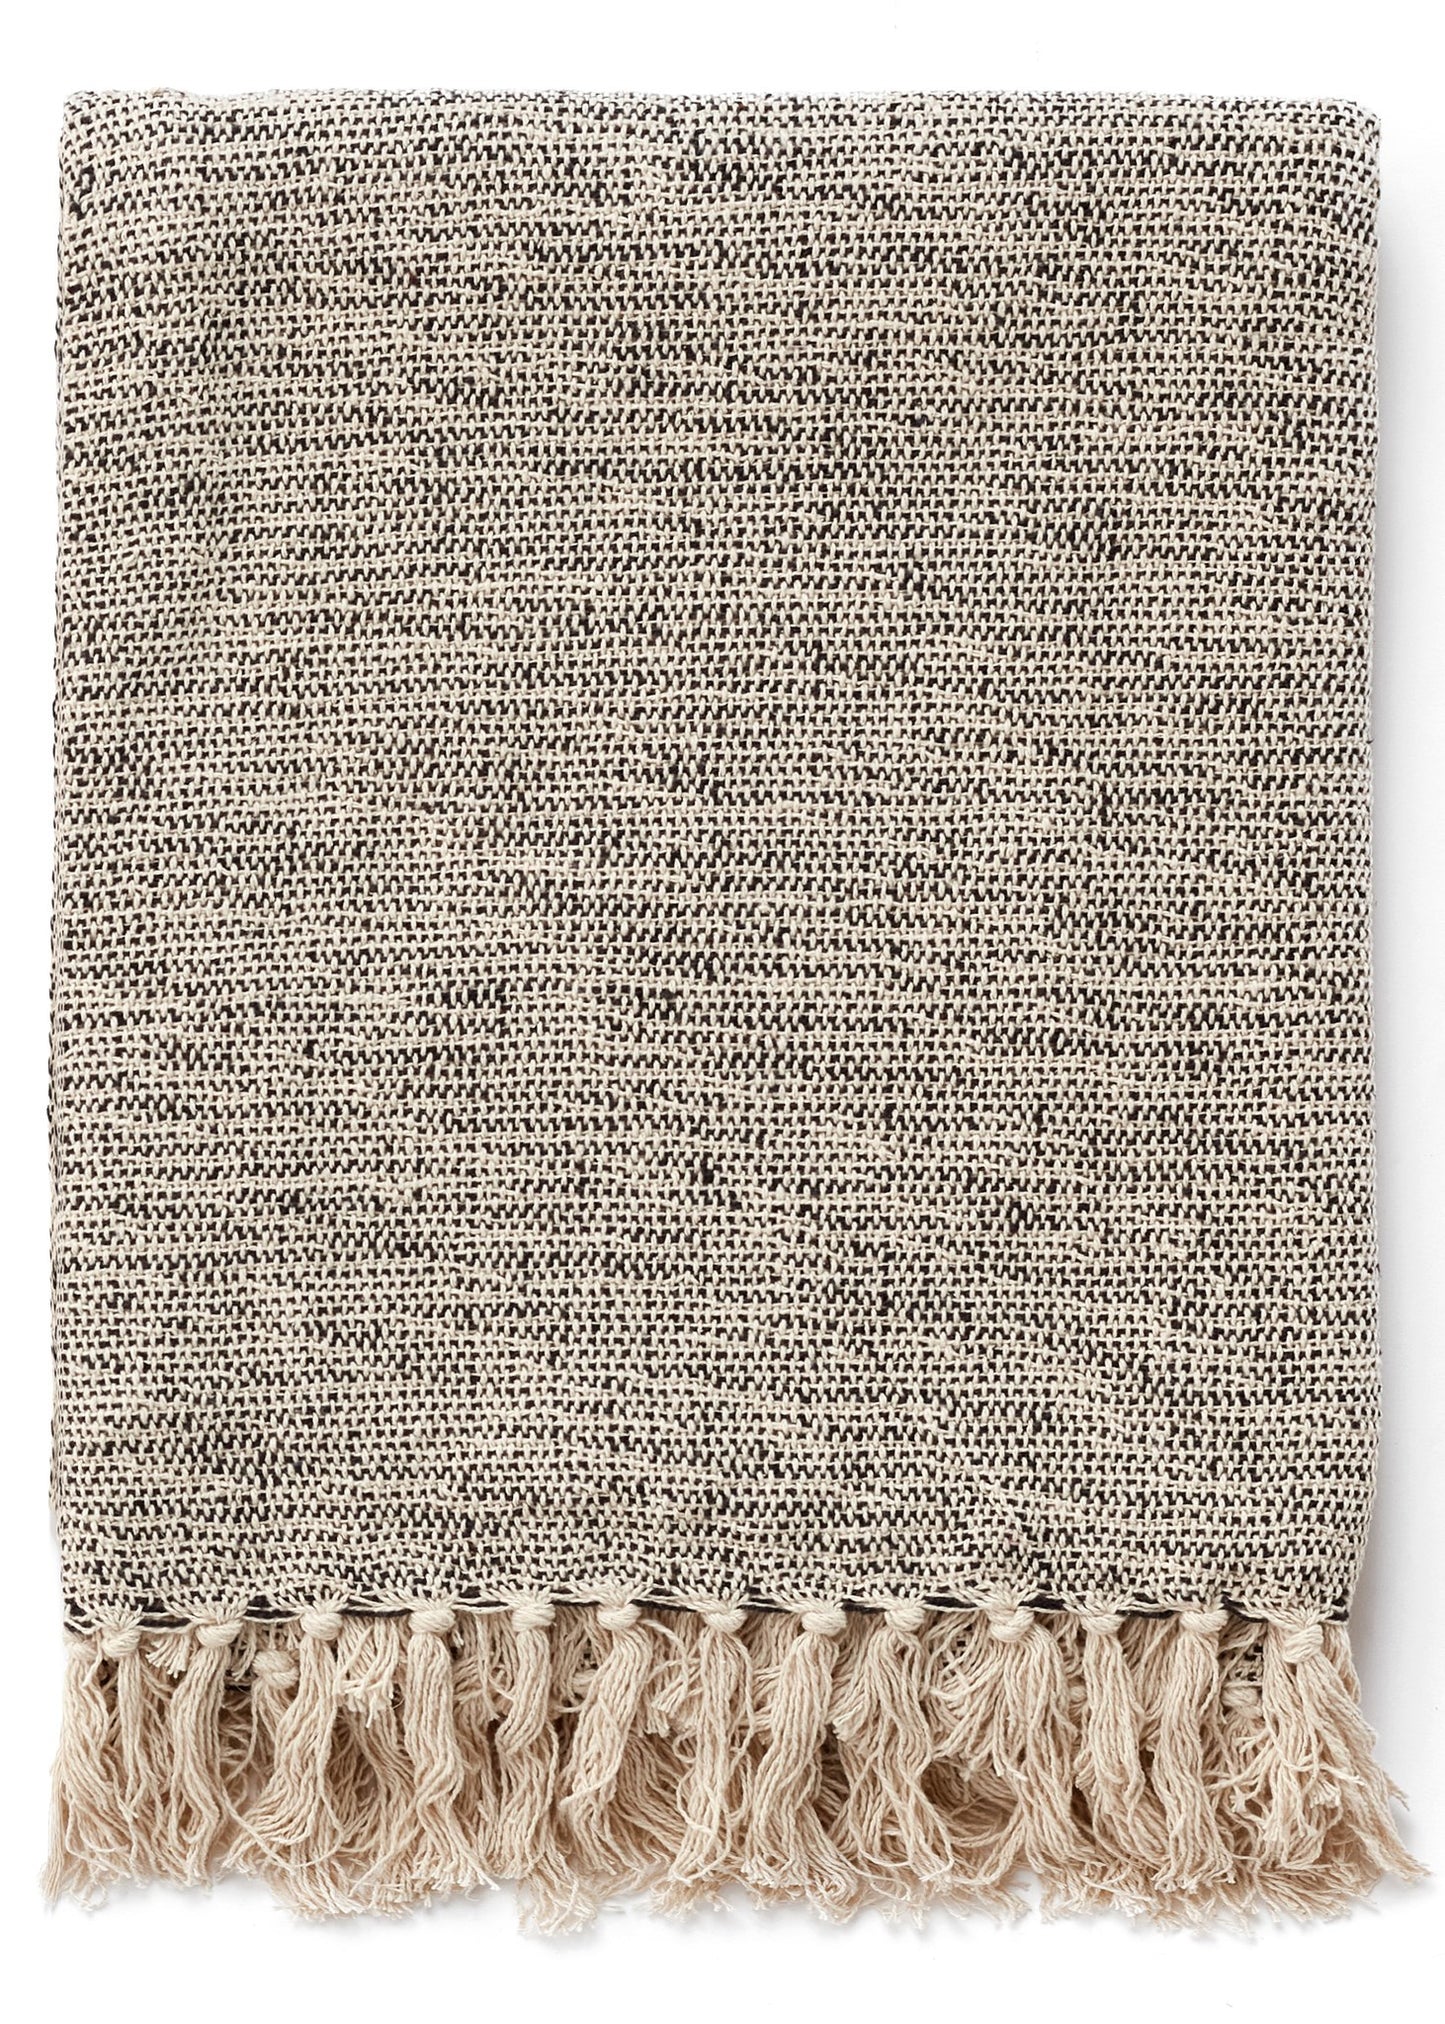 Beige and Black Throw Blanket with Fringe 